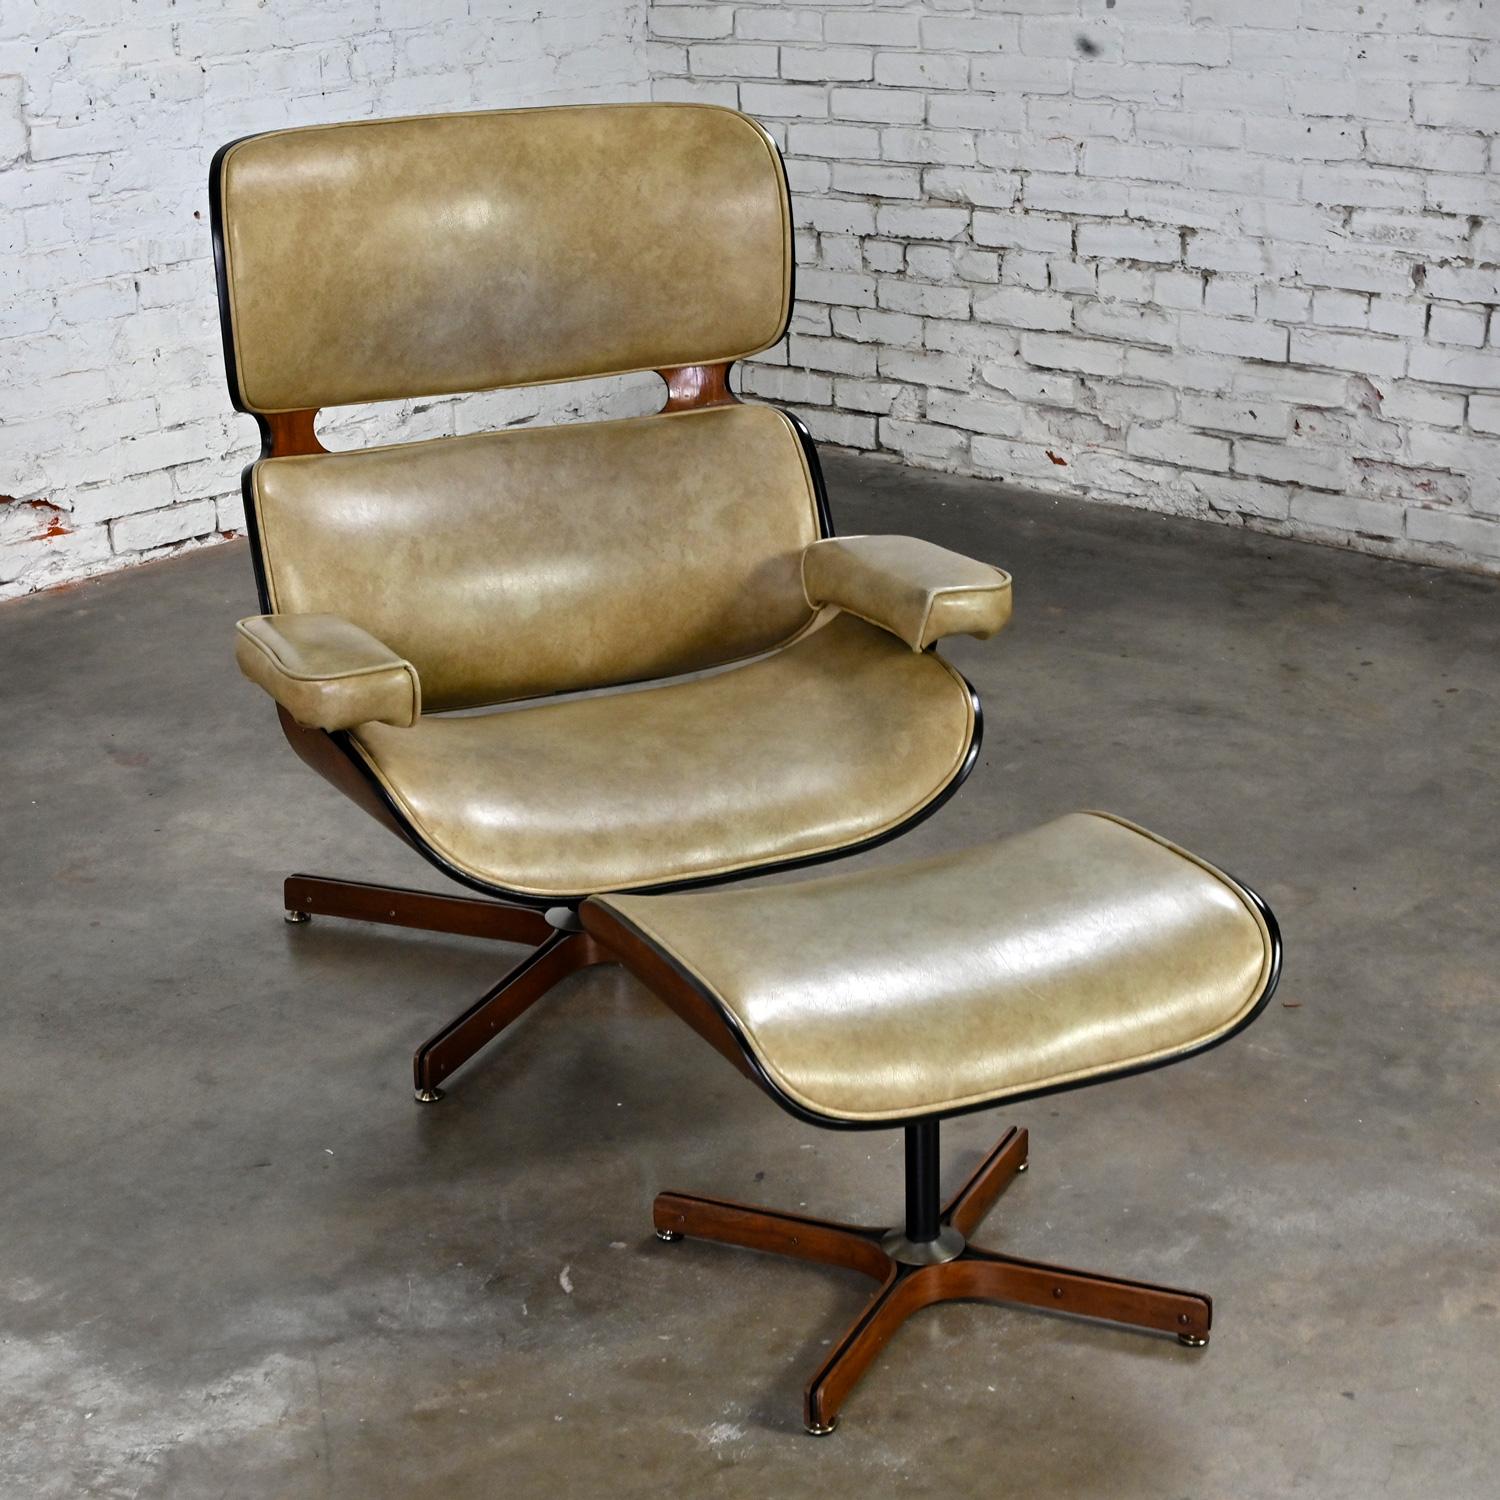 Fabulous Mid Century Modern “The Mr. Chair” lounge chair & ottoman by George Mulhauser for Plycraft comprised of walnut bentwood frames or shells, tan vinyl or faux leather, black painted shafts & 4 prong swivel & recline bases with walnut edges &